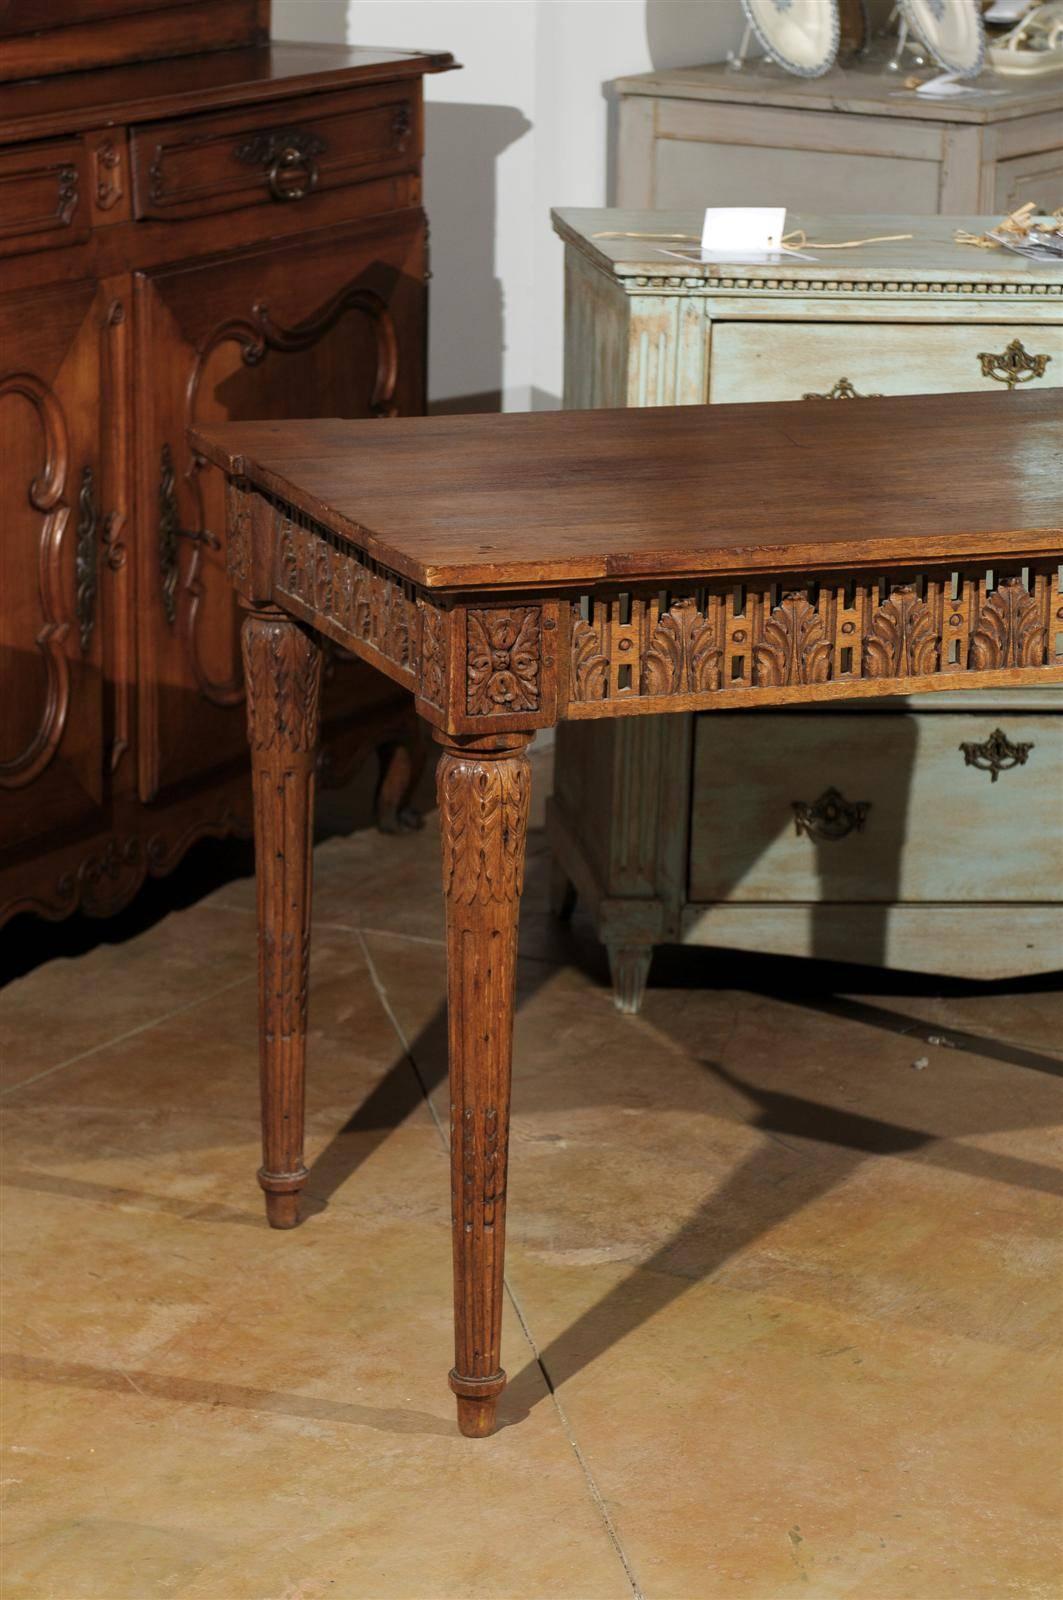 Oak French Period Directoire Table with Carved Apron and Palmette Motifs, circa 1805